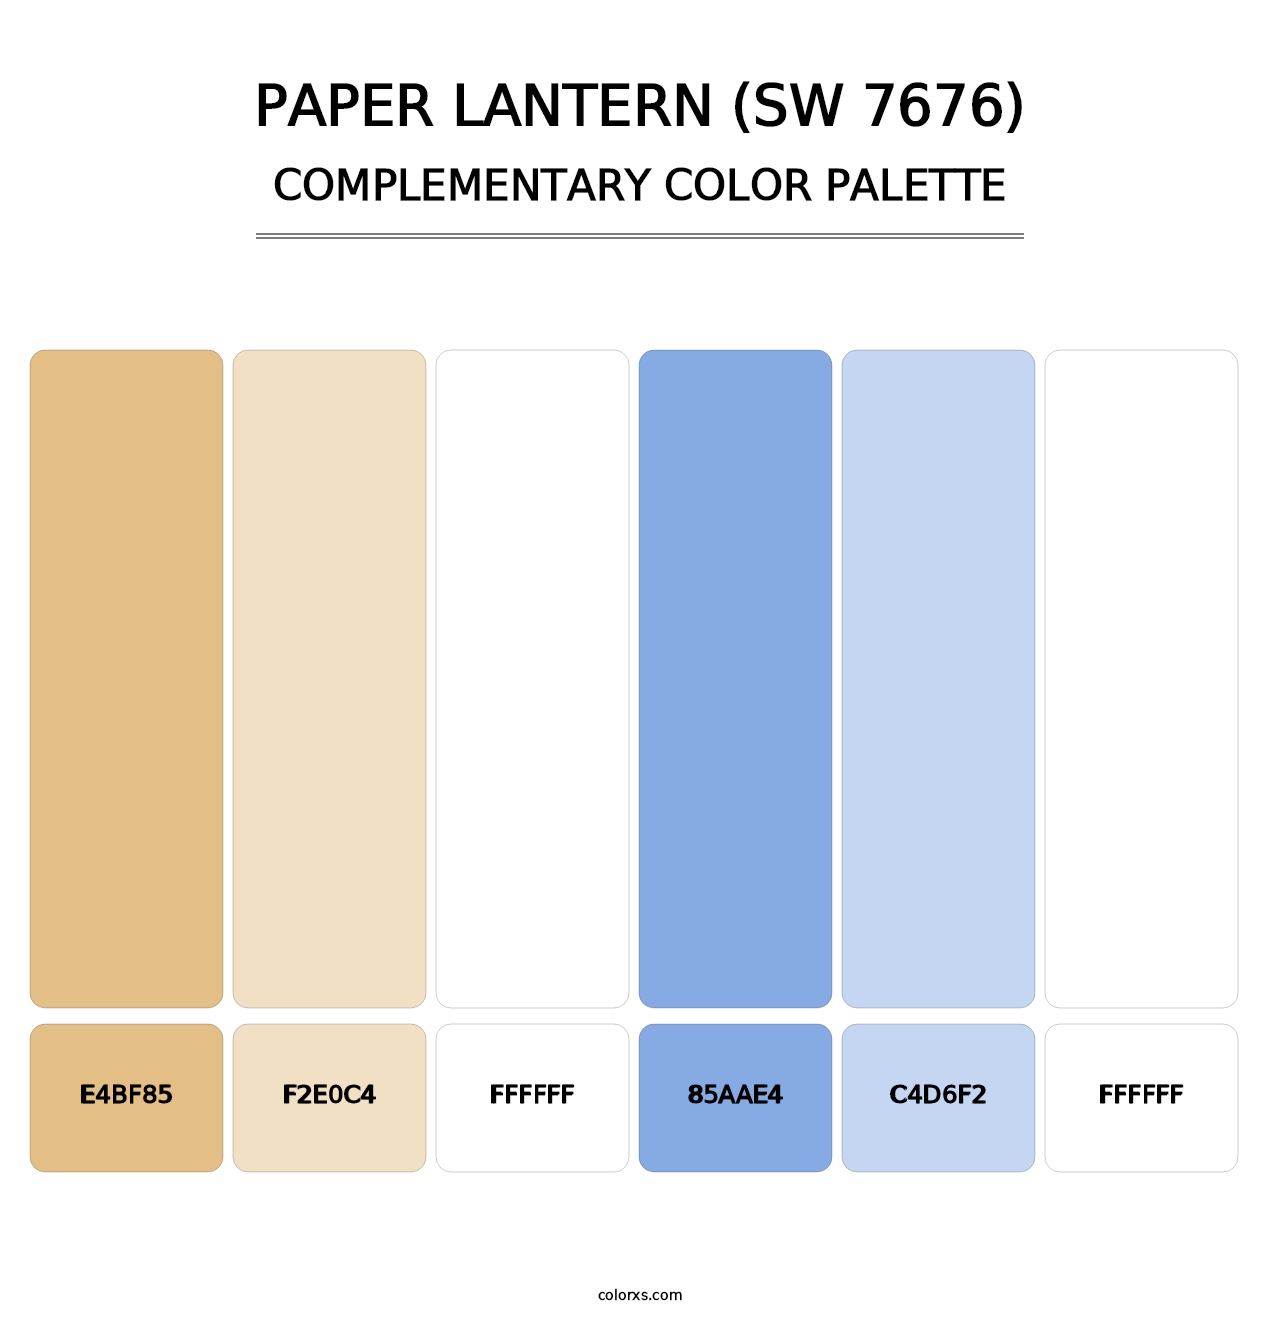 Paper Lantern (SW 7676) - Complementary Color Palette